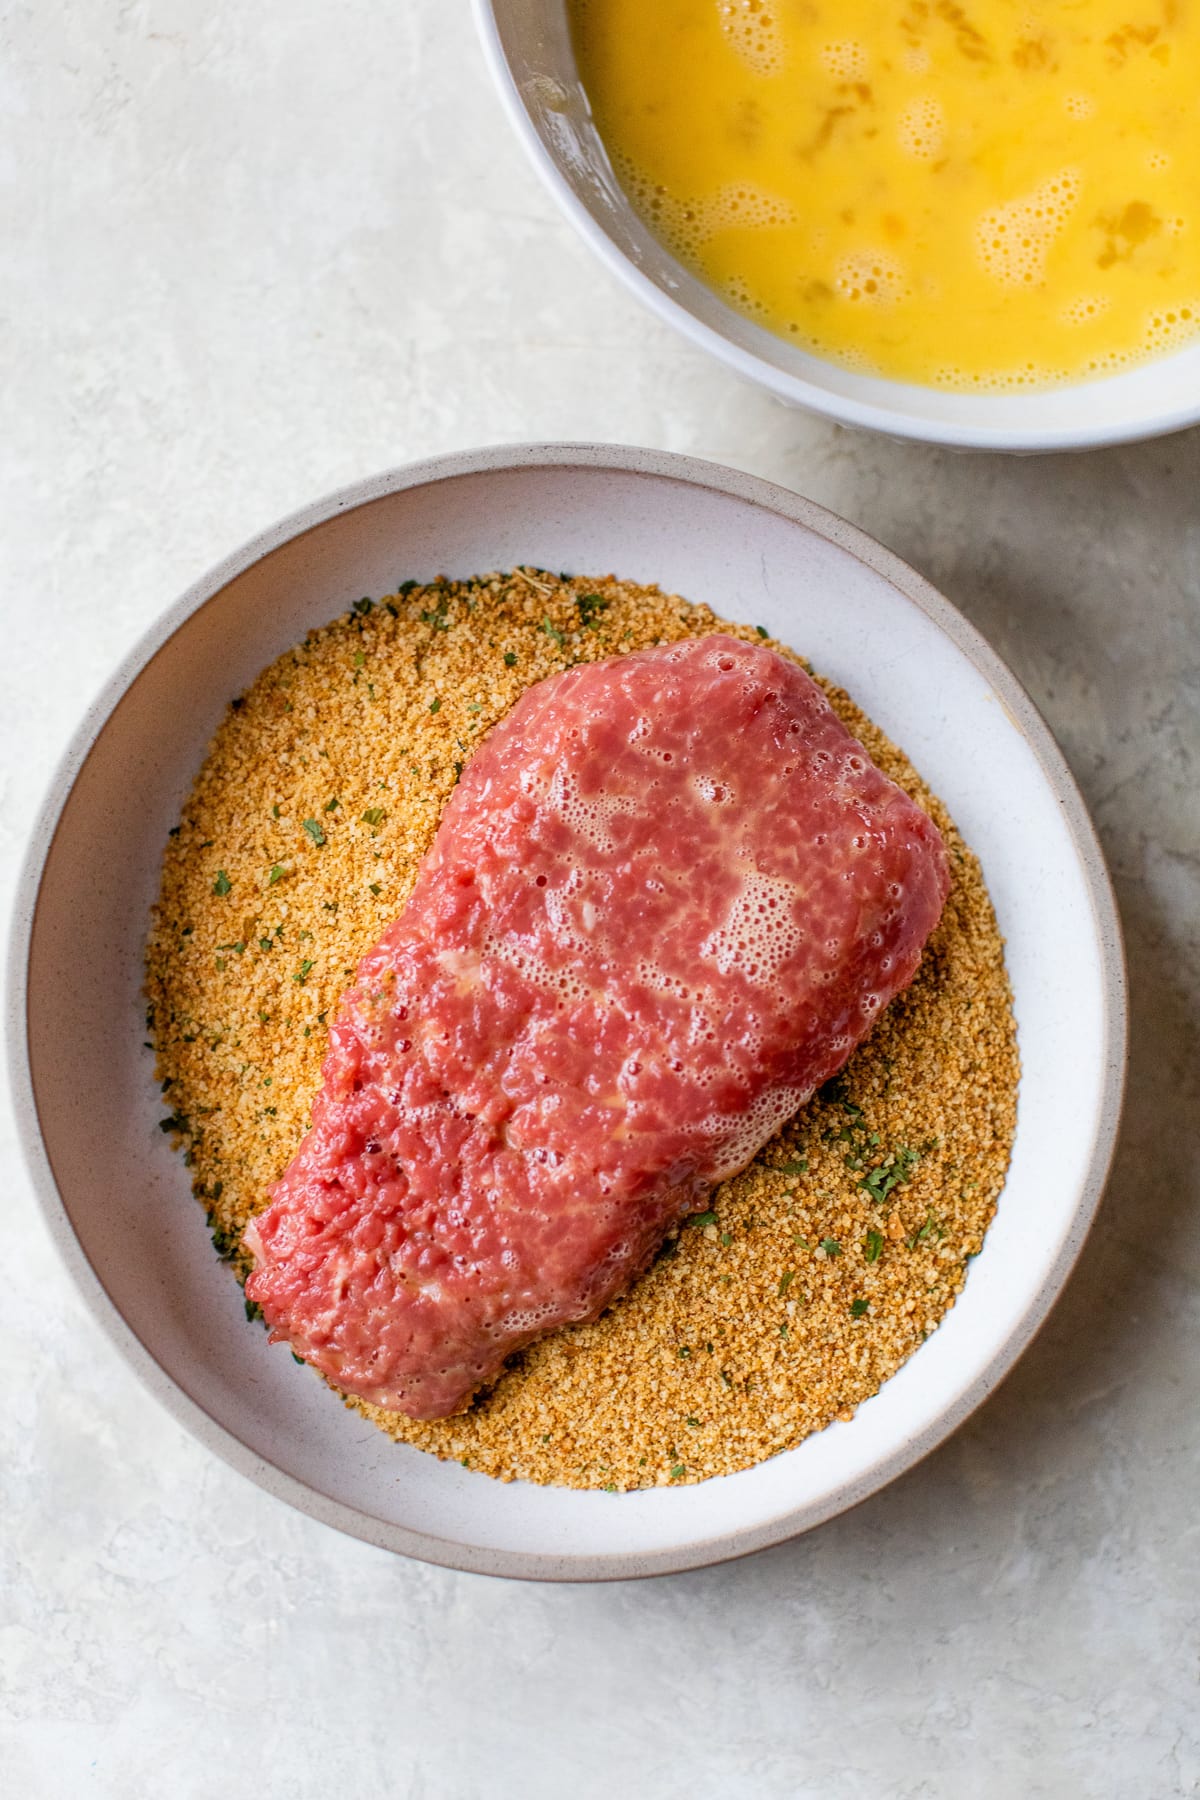 diced steak with egg and bread crumbs